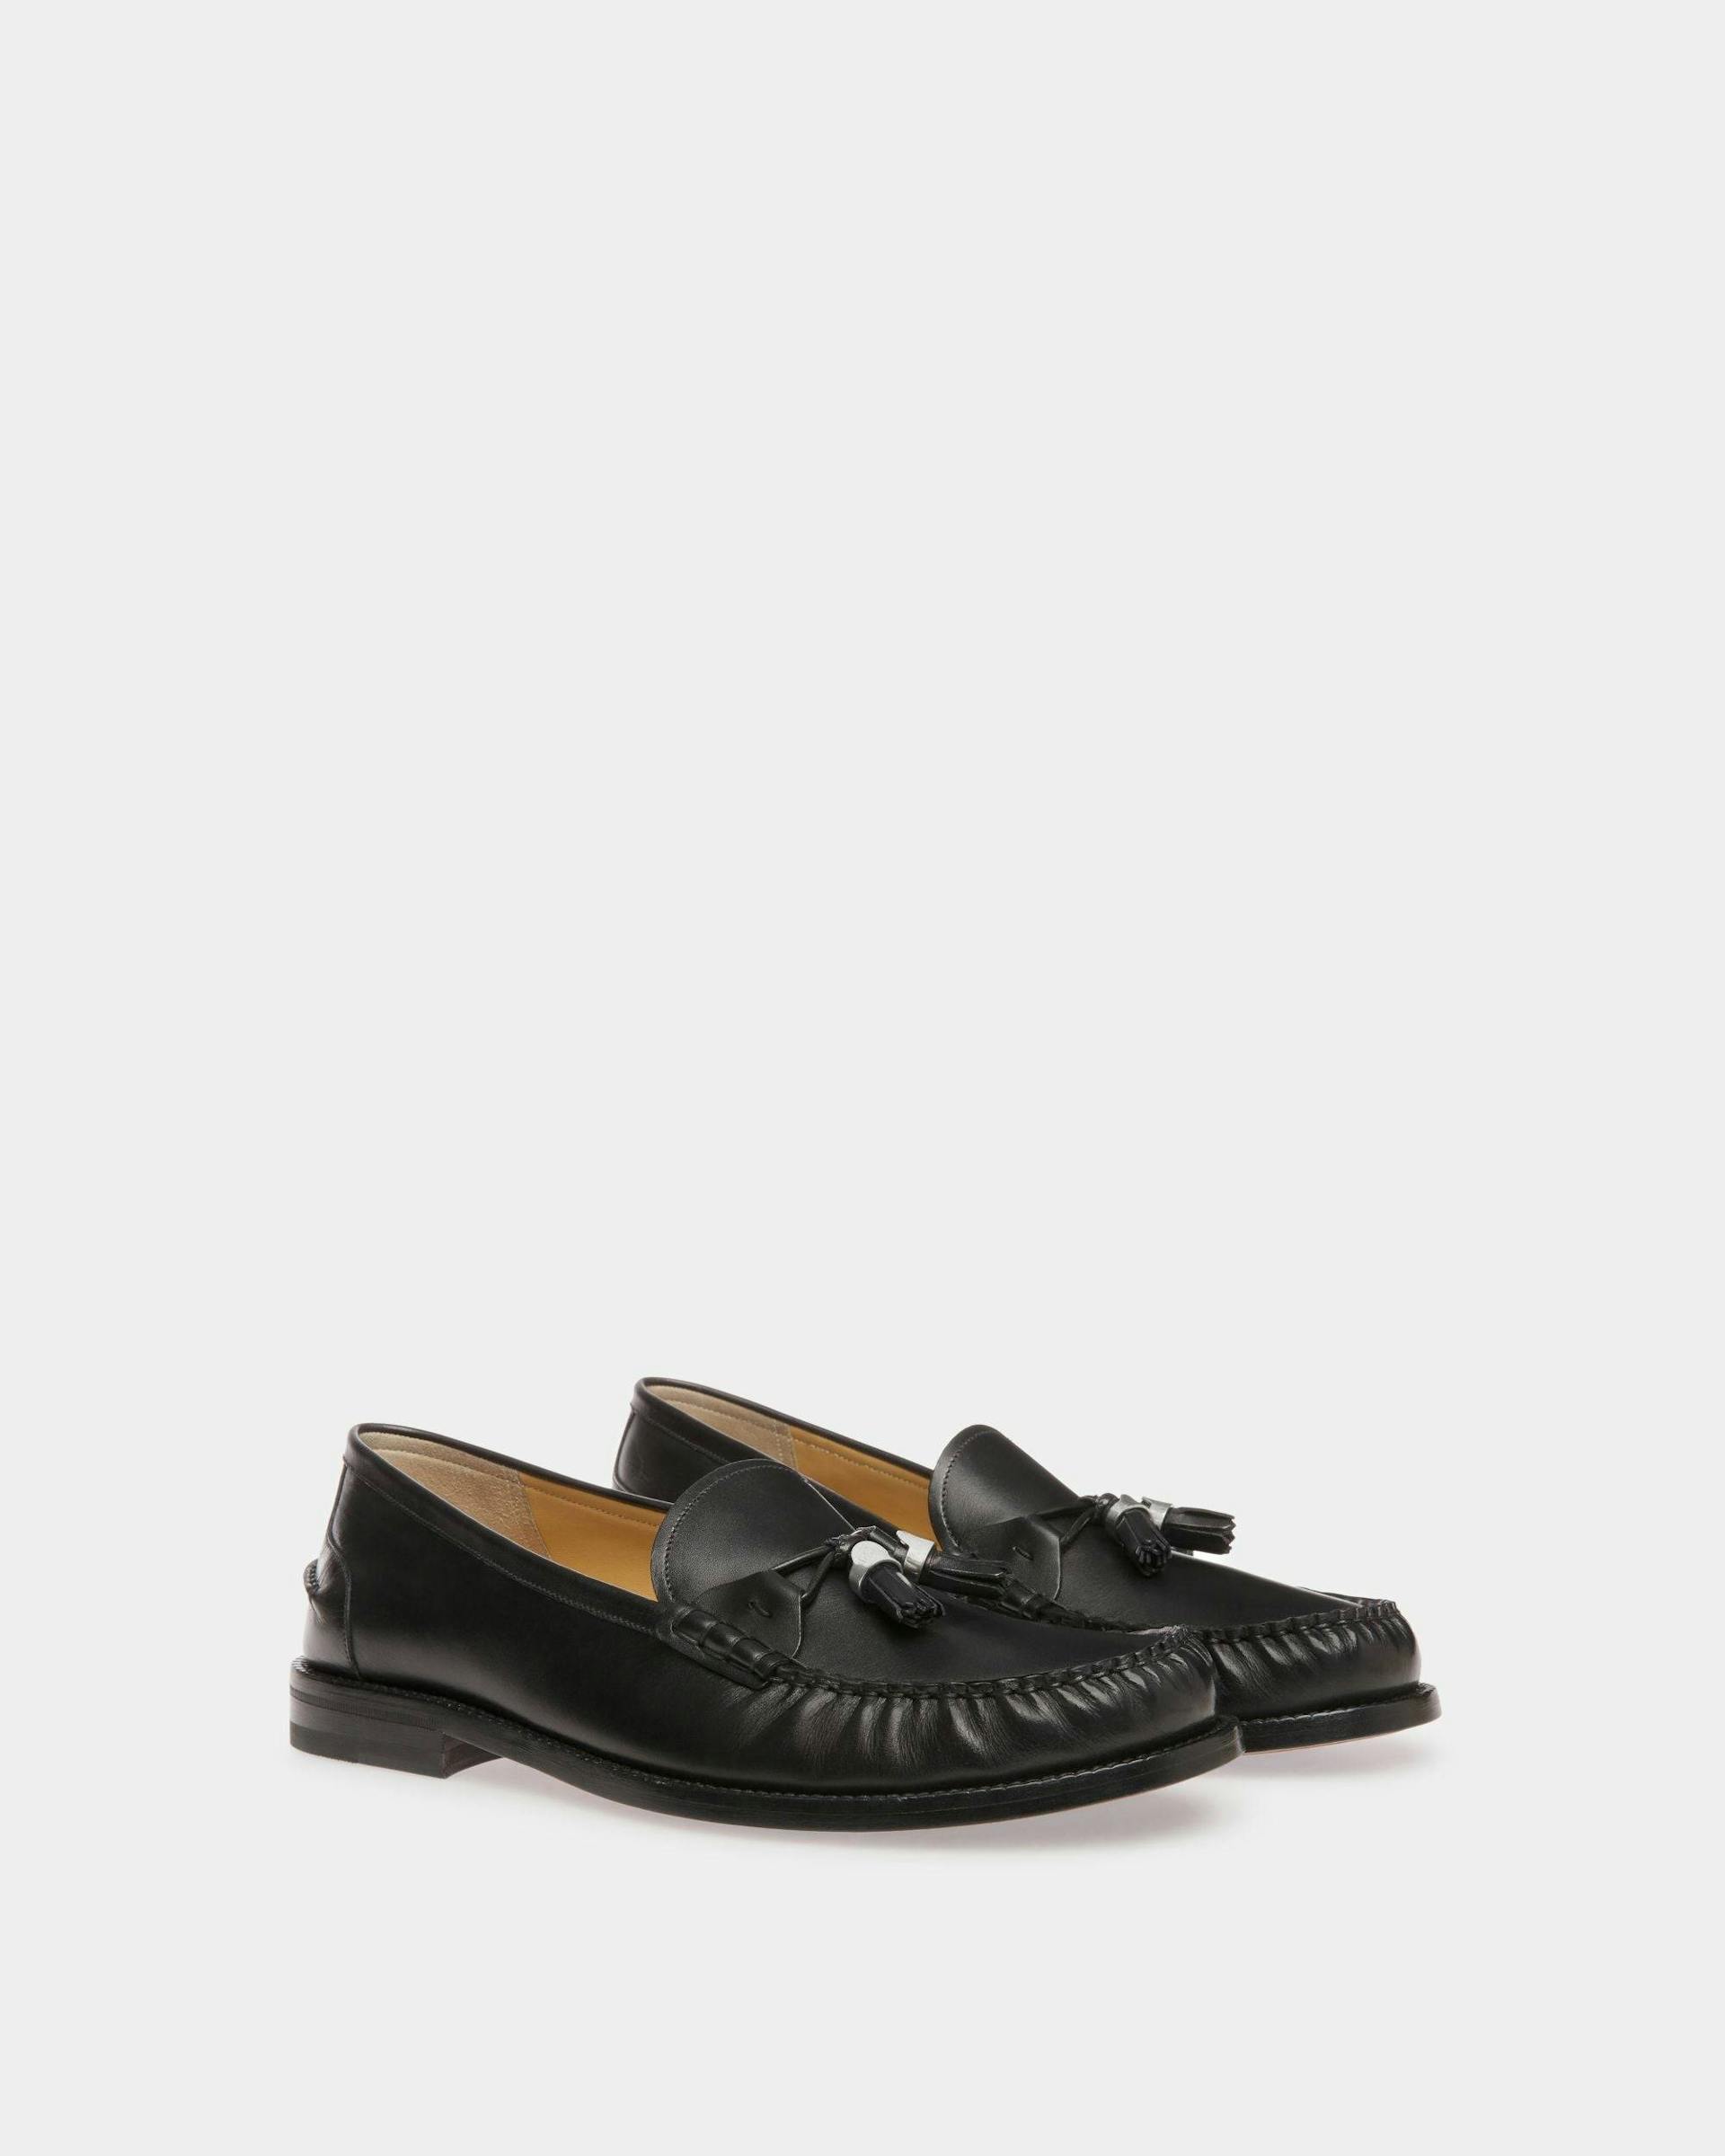 Men's Rome Mocassins In Black Leather | Bally | Still Life 3/4 Front